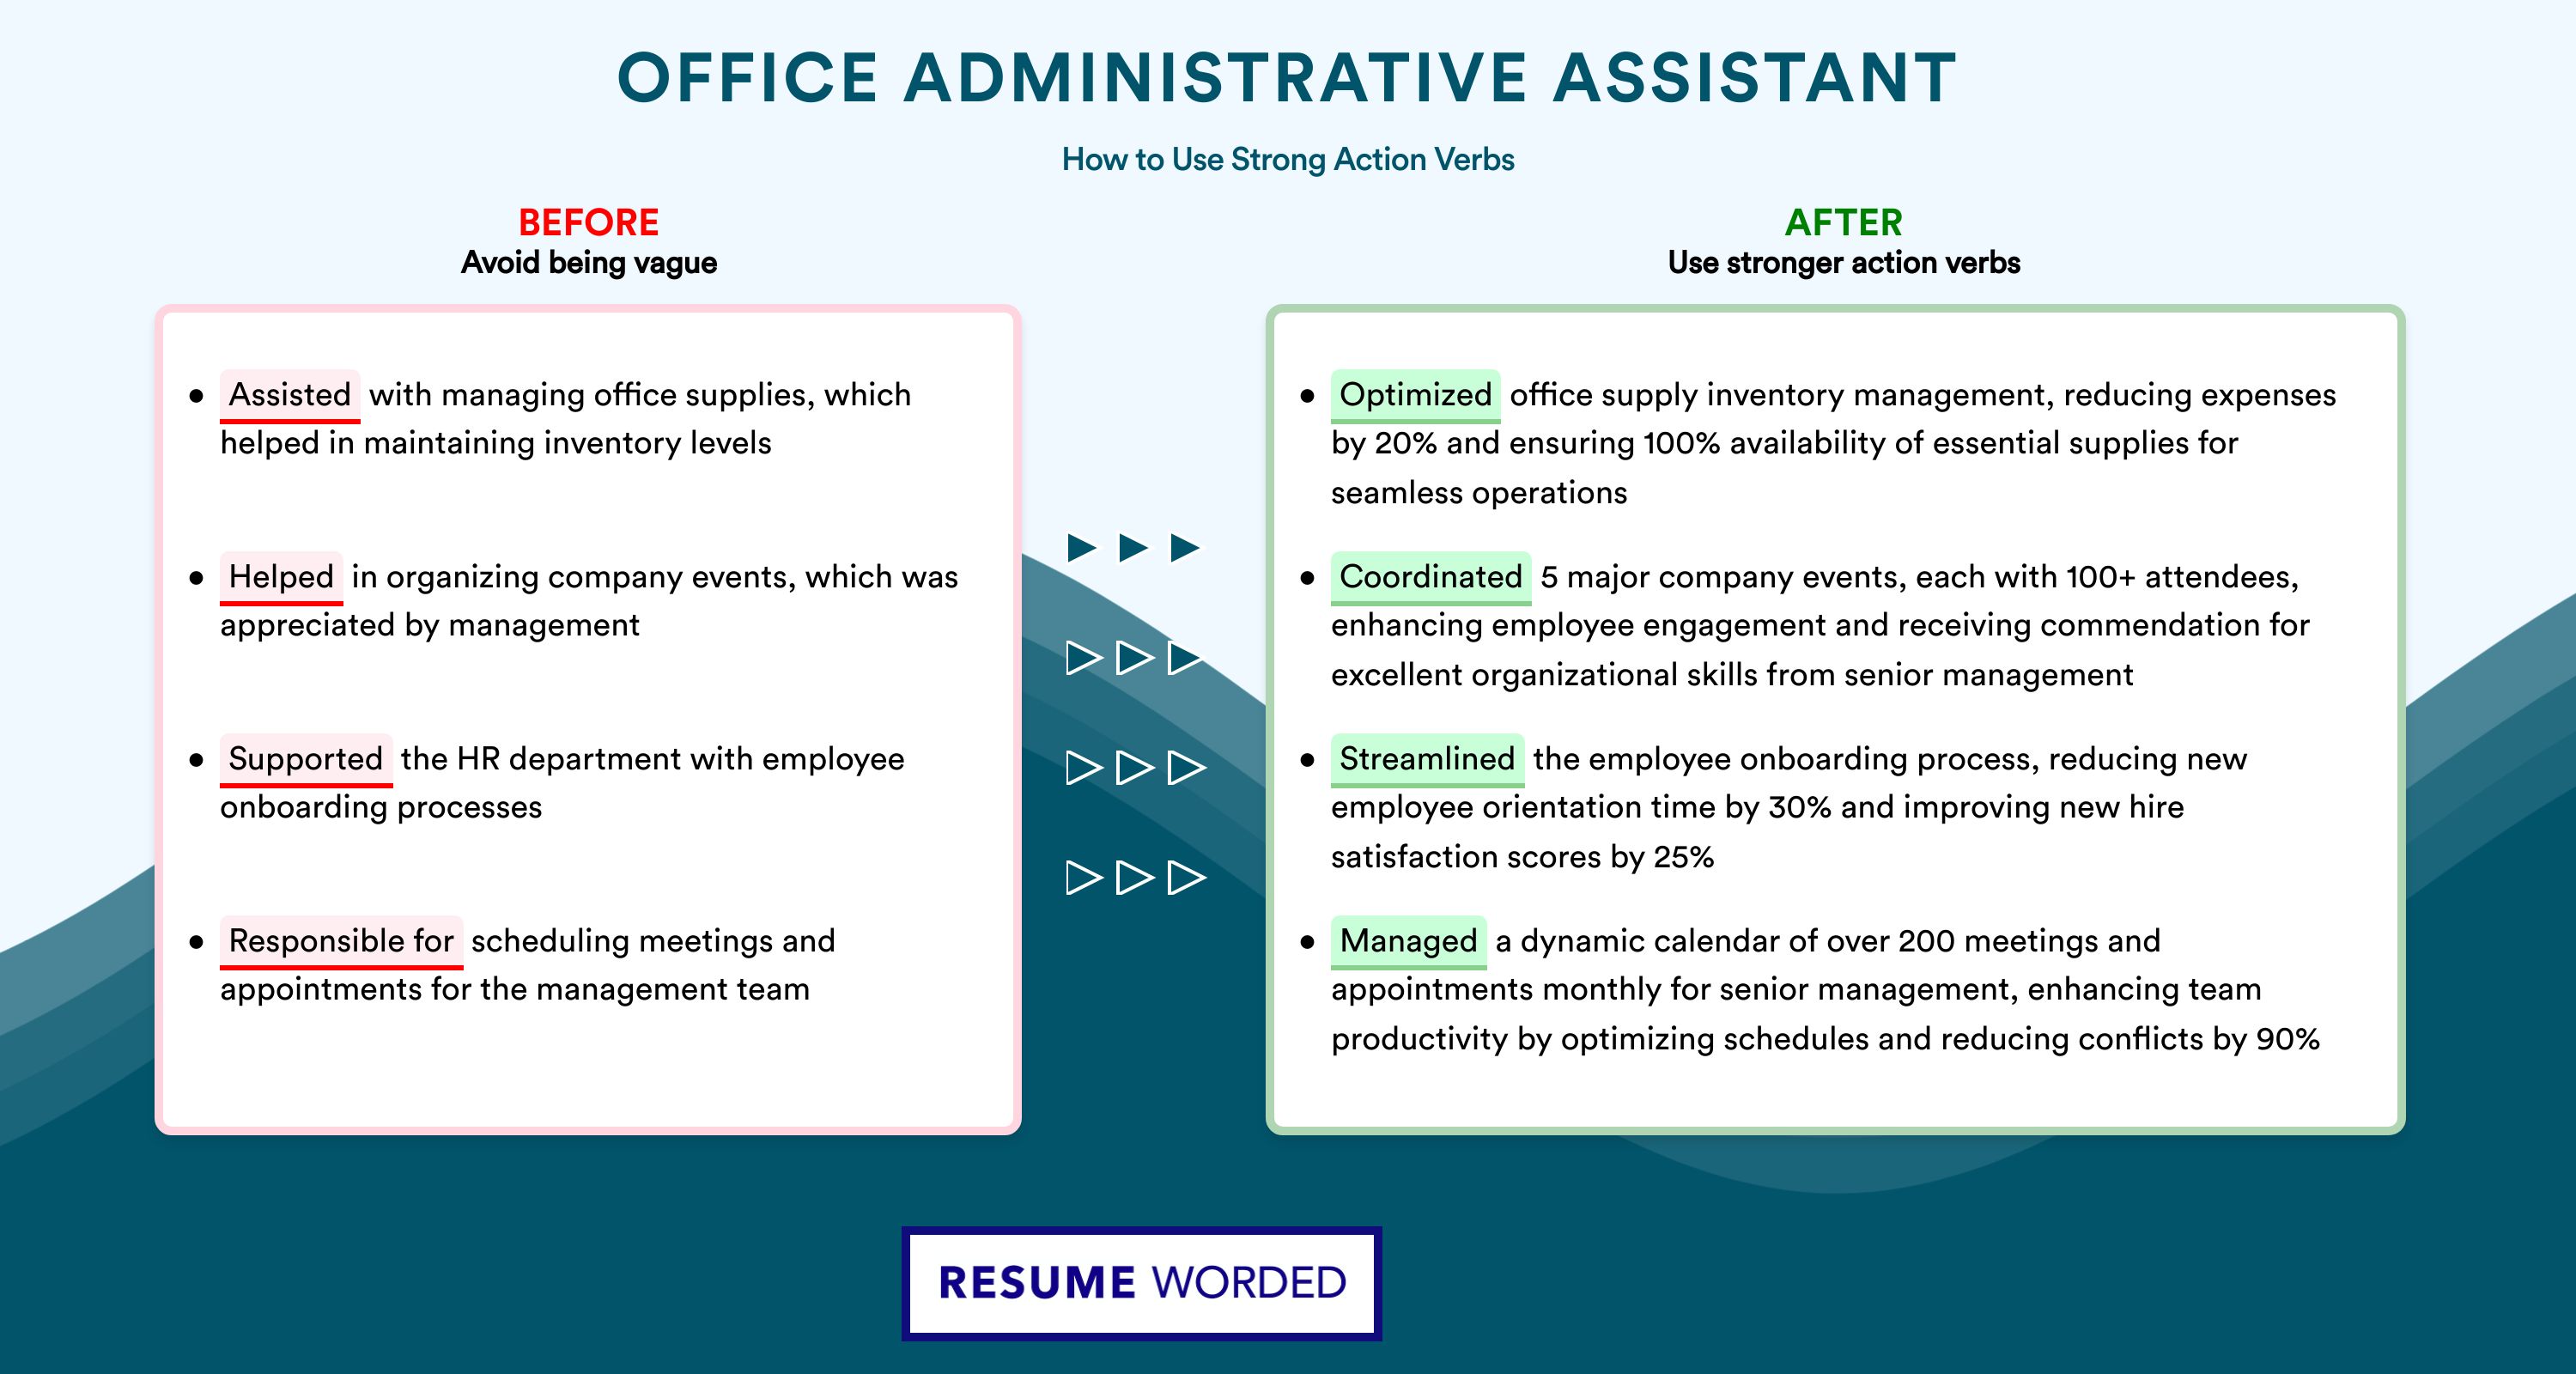 Action Verbs for Office Administrative Assistant